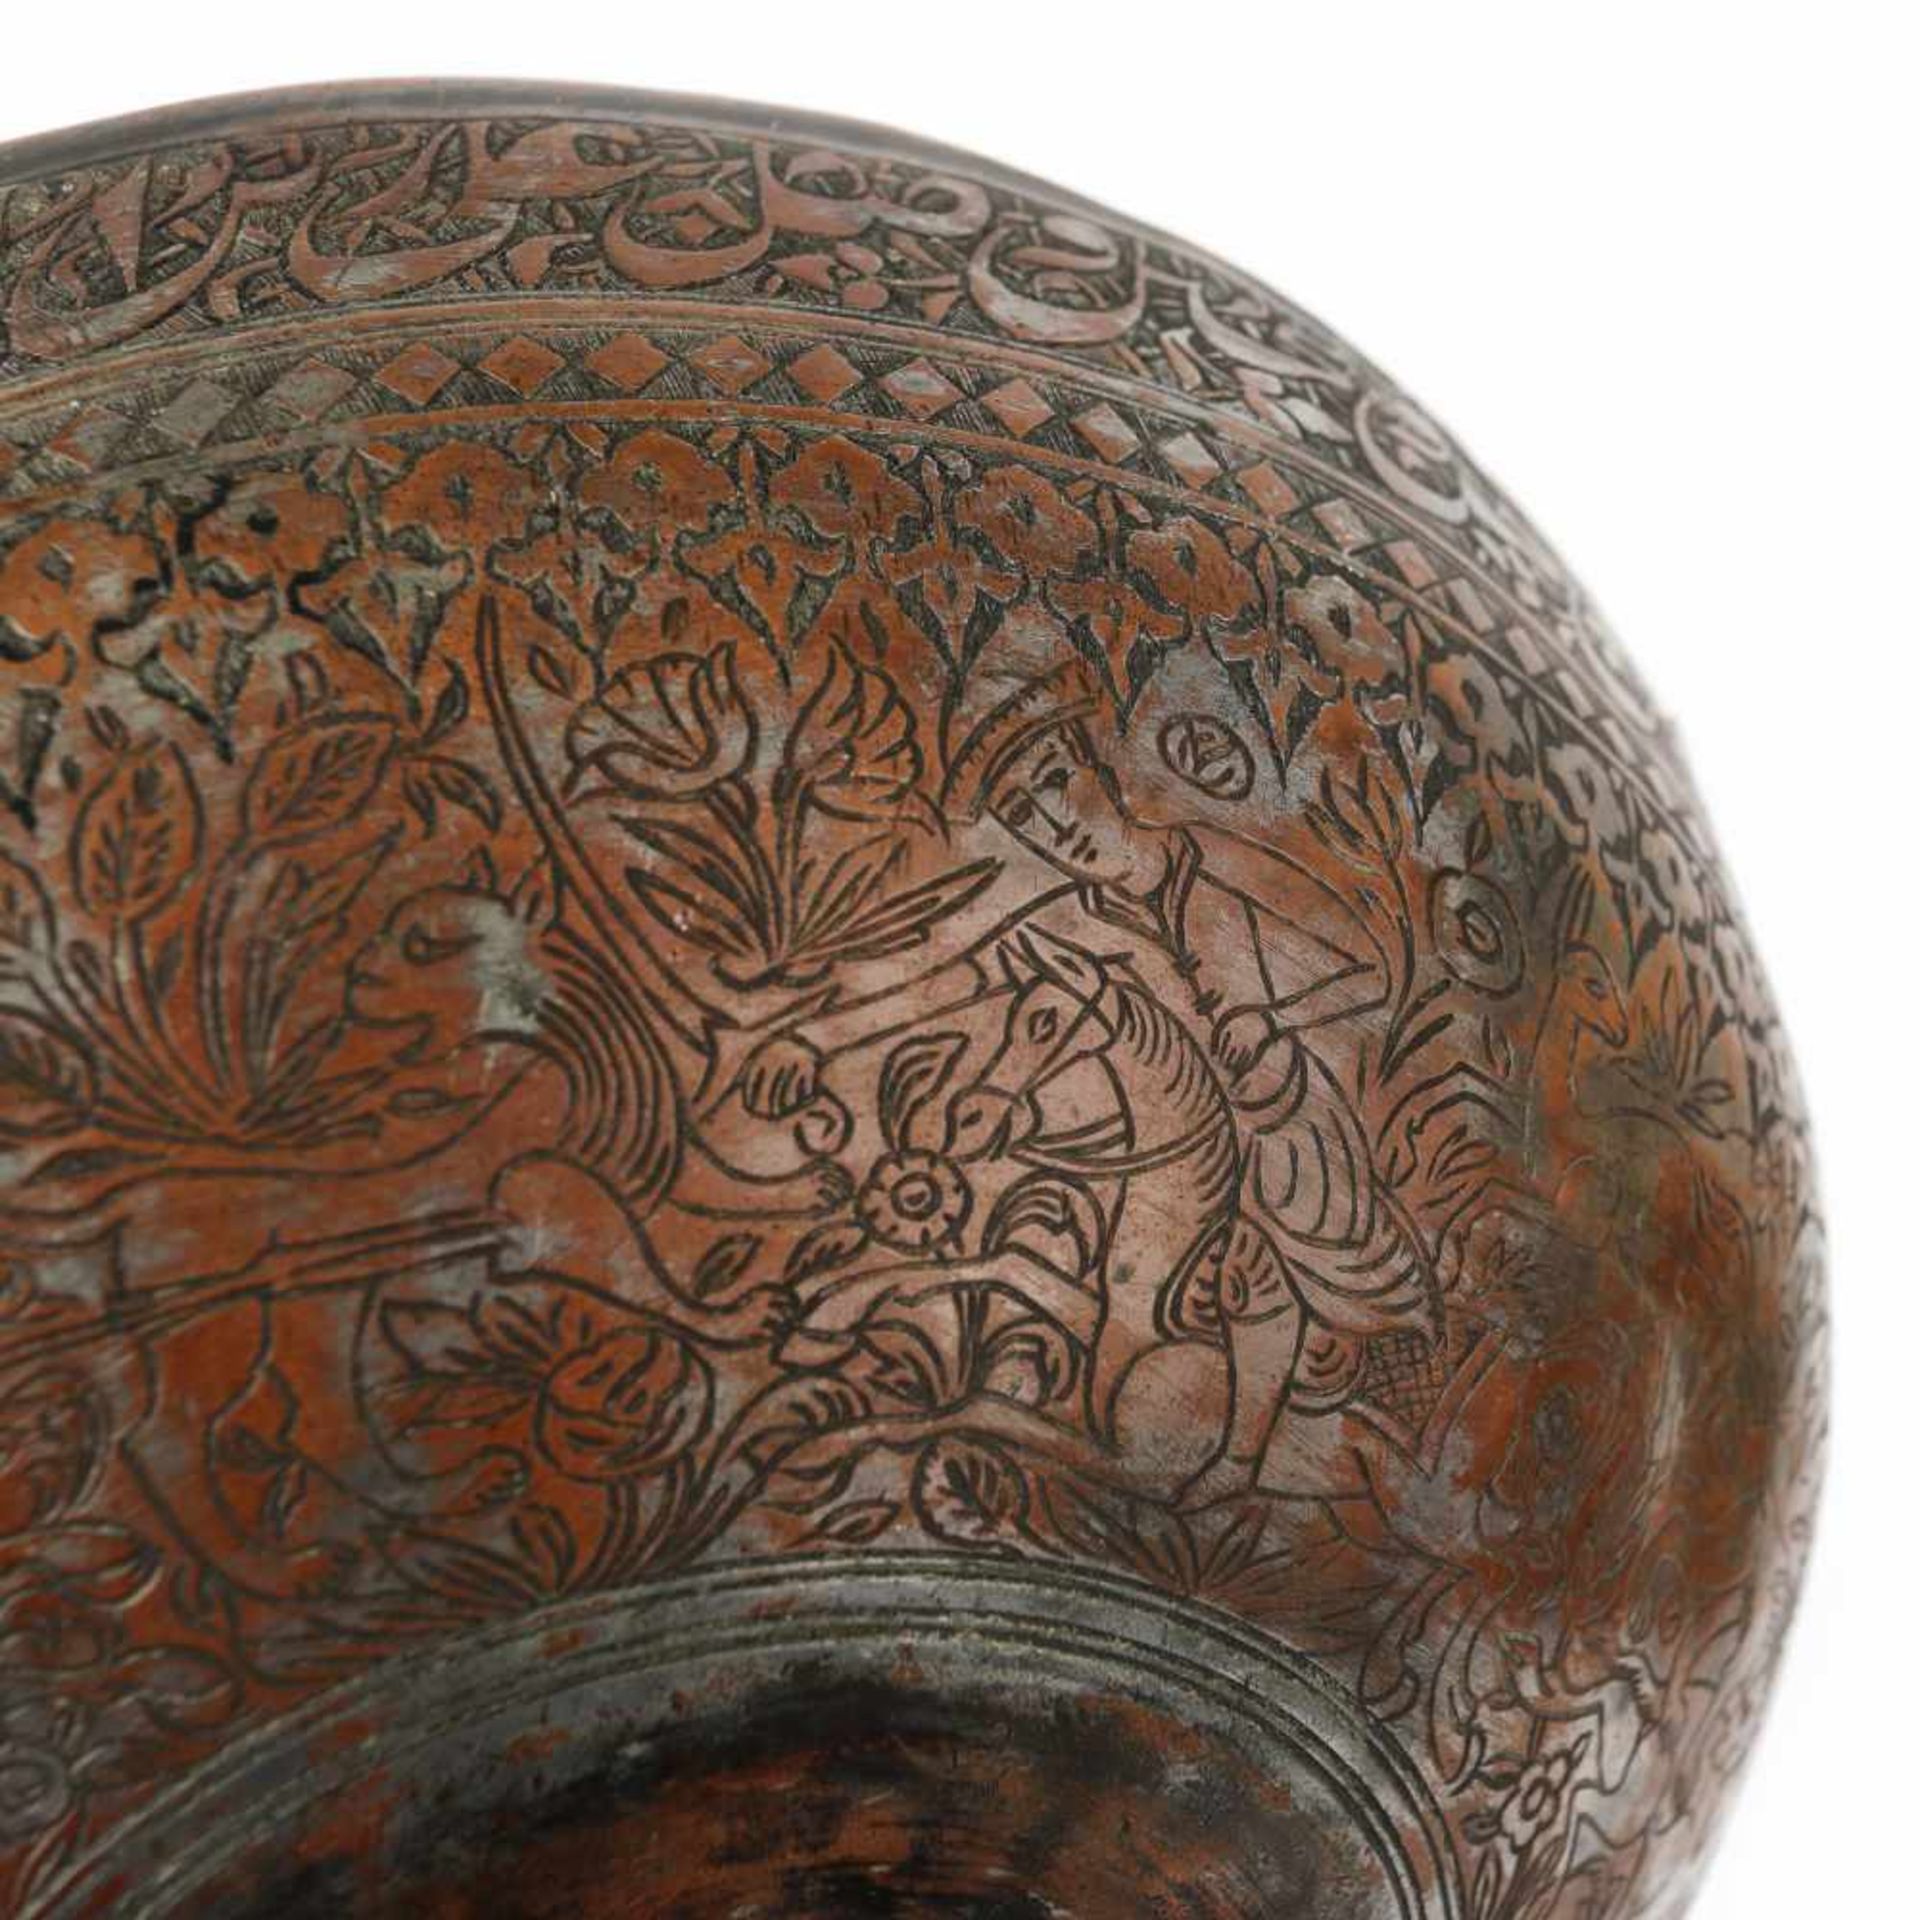 Persian copper vessel, decorated with a hunting scene, early 20th century - Image 2 of 4